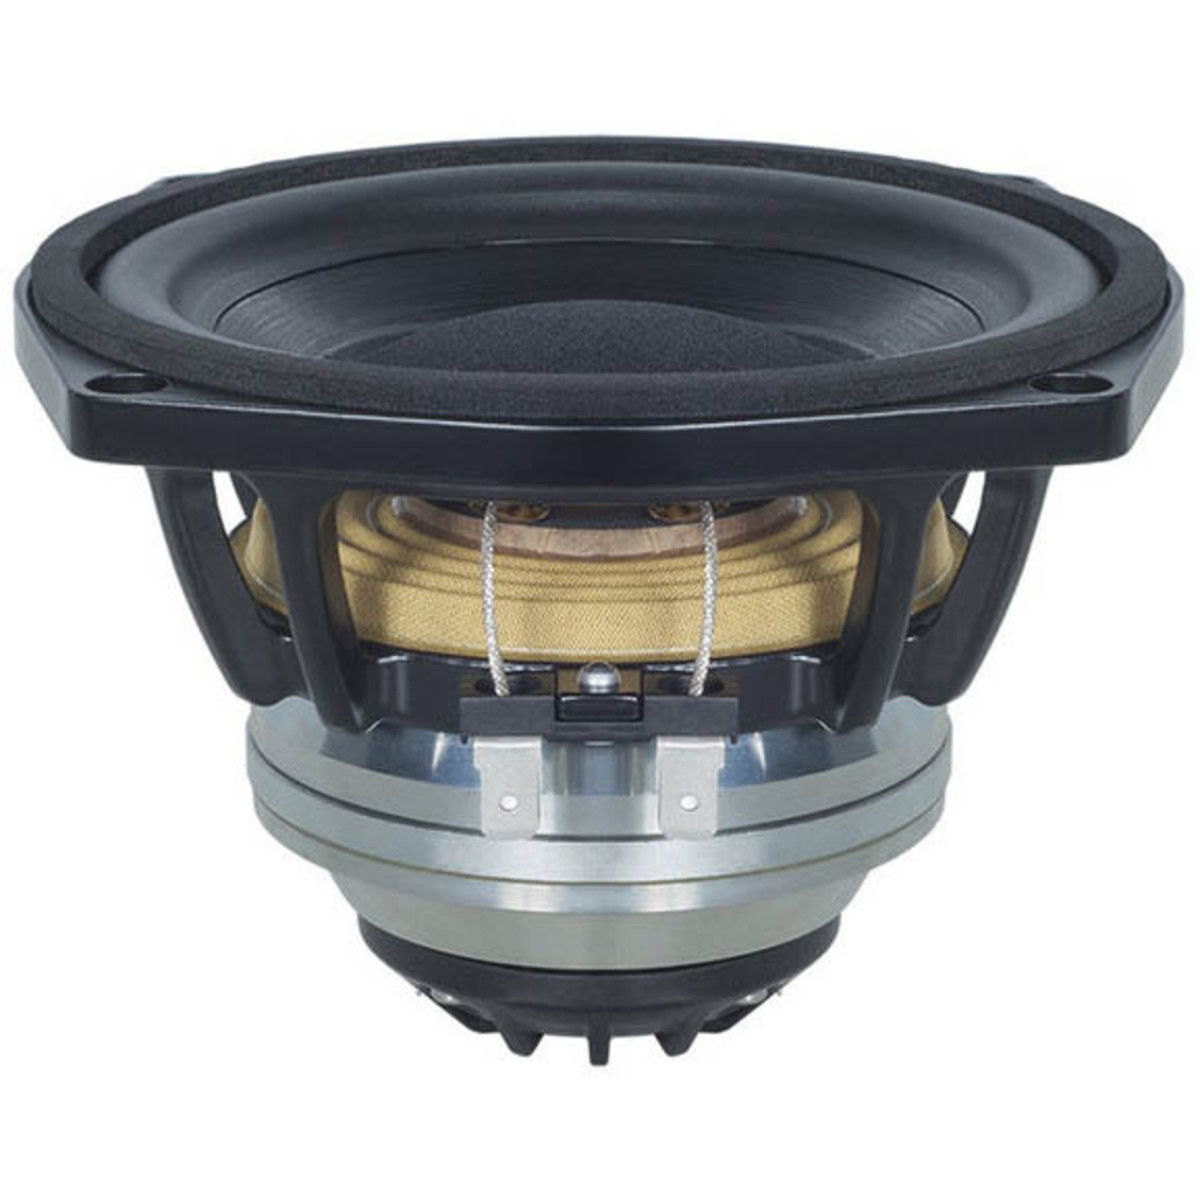 Picture of B&C Speakers 5CXN44 5 in. 80 x 80 8 Ohm Professional Coaxial Speaker